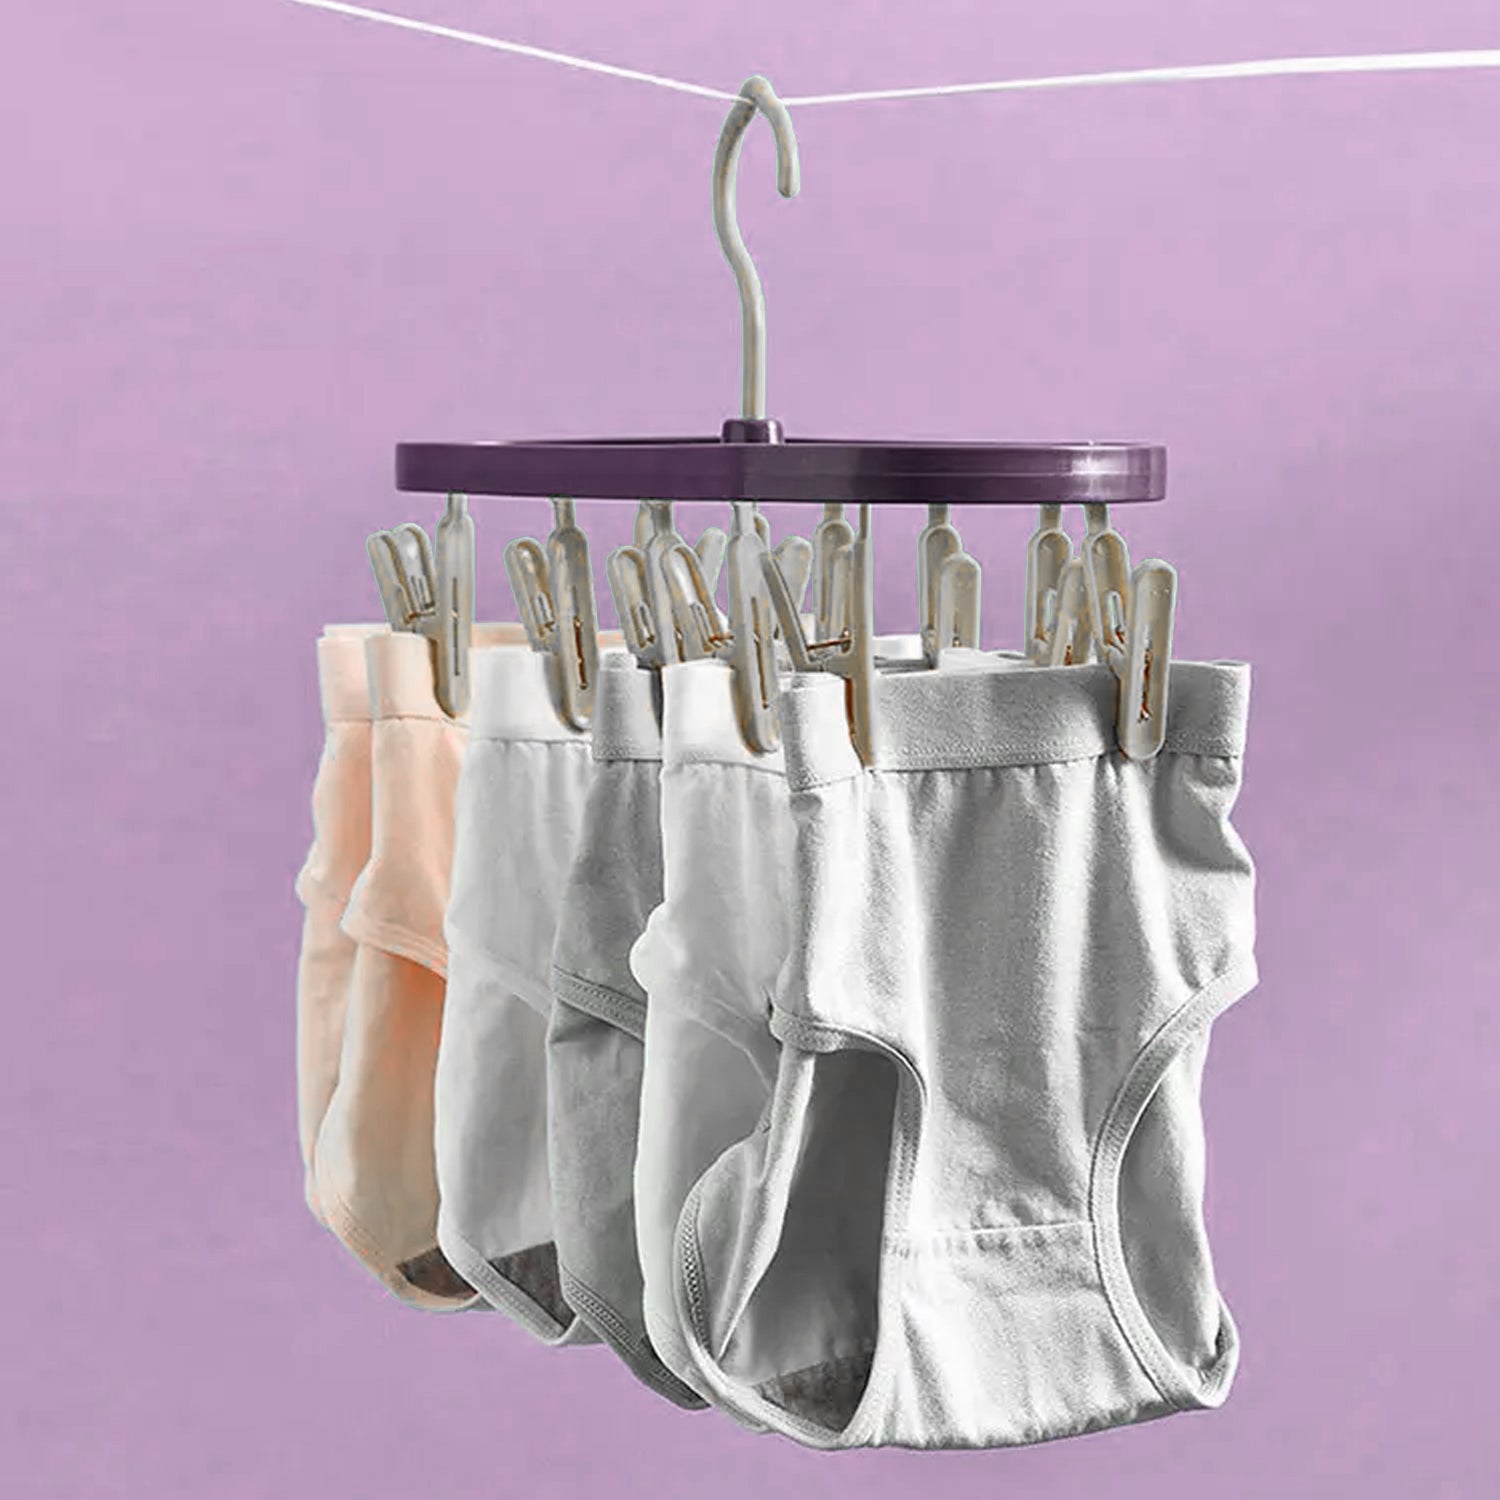 6919C  CLOTHESPIN RACK LAUNDRY DRYING RACK, CLOTHES HANGERS WITH 8 CLIPS, CLIP HANGER DRIP HANGER FOR DRYING UNDERWEAR, BABY CLOTHES, SOCKS, BRAS, TOWEL, CLOTH DIAPERS, GLOVE